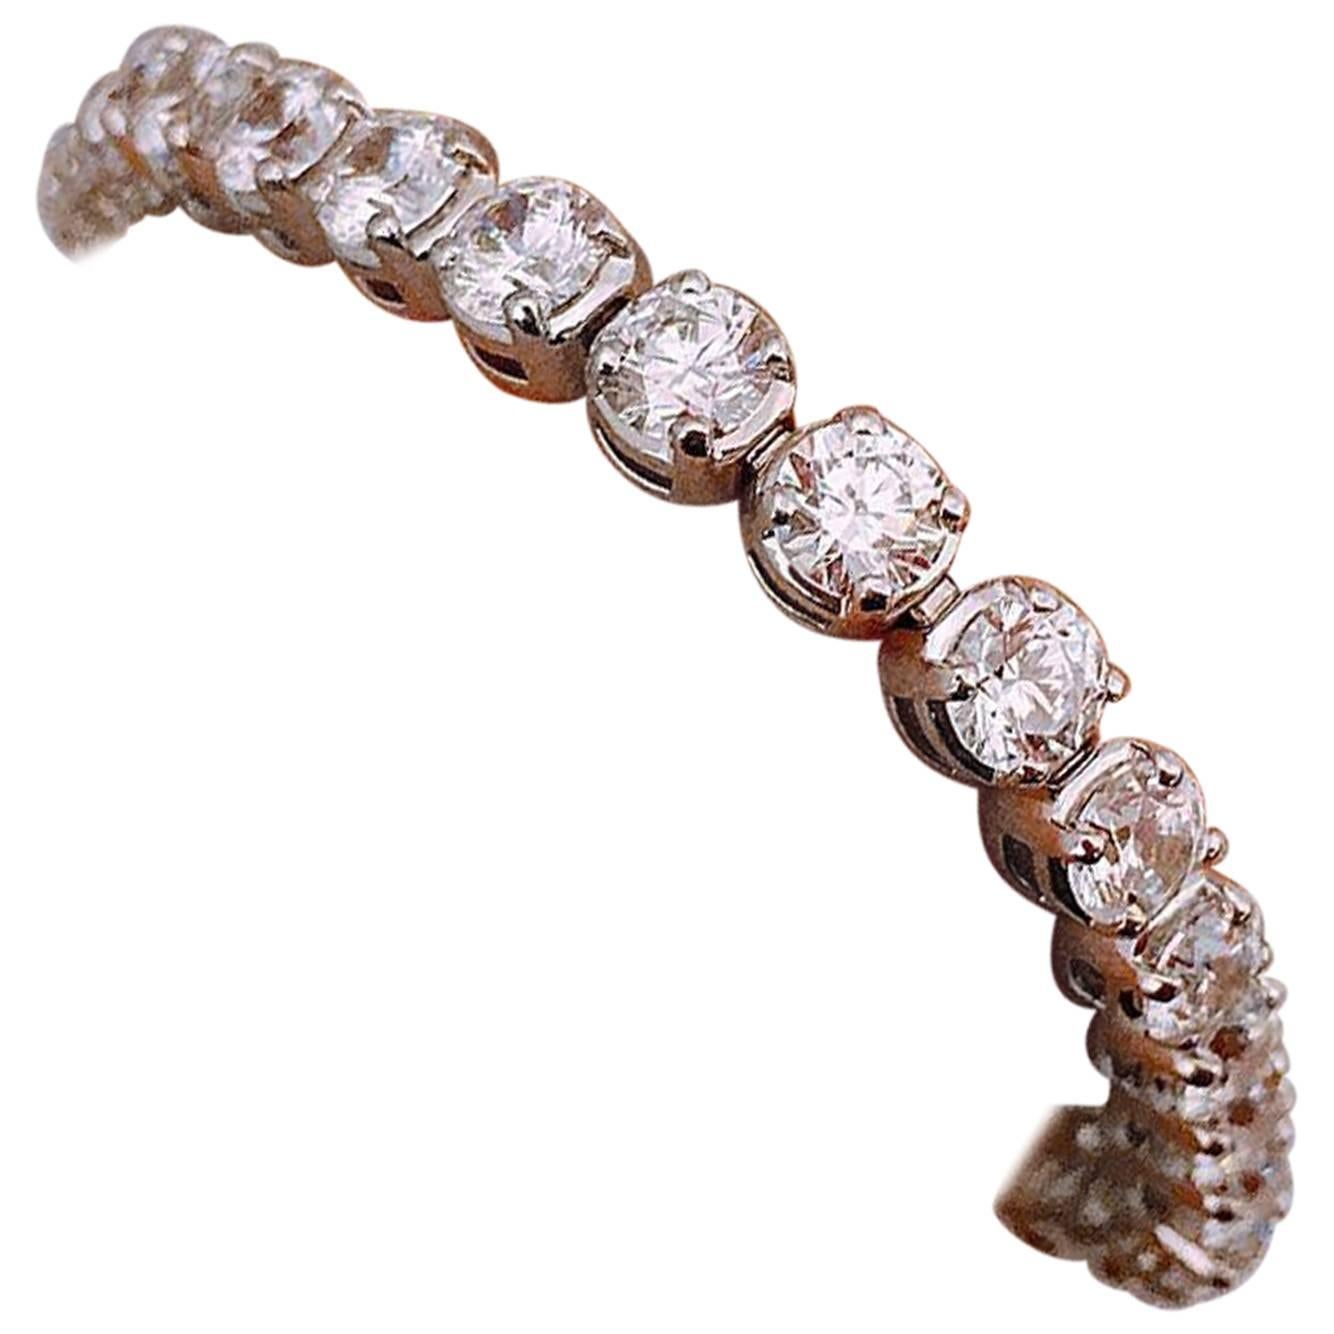 Each diamond was hand picked first and foremost to have a strong fiery rainbow which is the most important effect of a bracelet! 
Color: E-F 
Clarity: Vs2
Cut: Excellent  
This Bracelet was designed and manufactured by Emilio! 7 inches long, and can